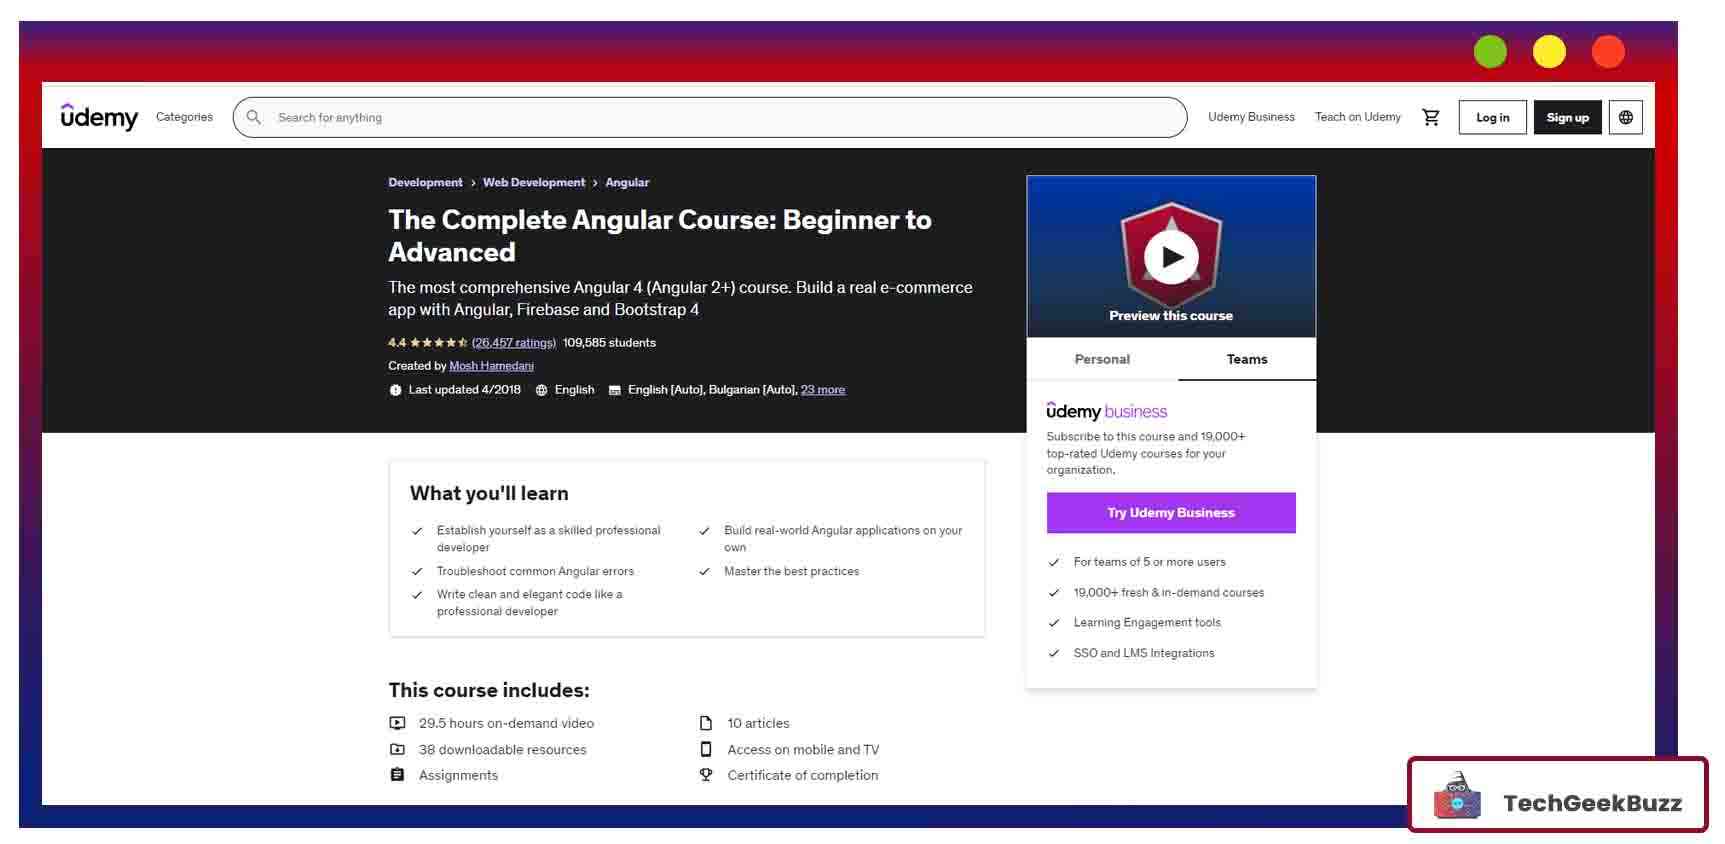  The Complete Angular Course: Beginner to Advanced